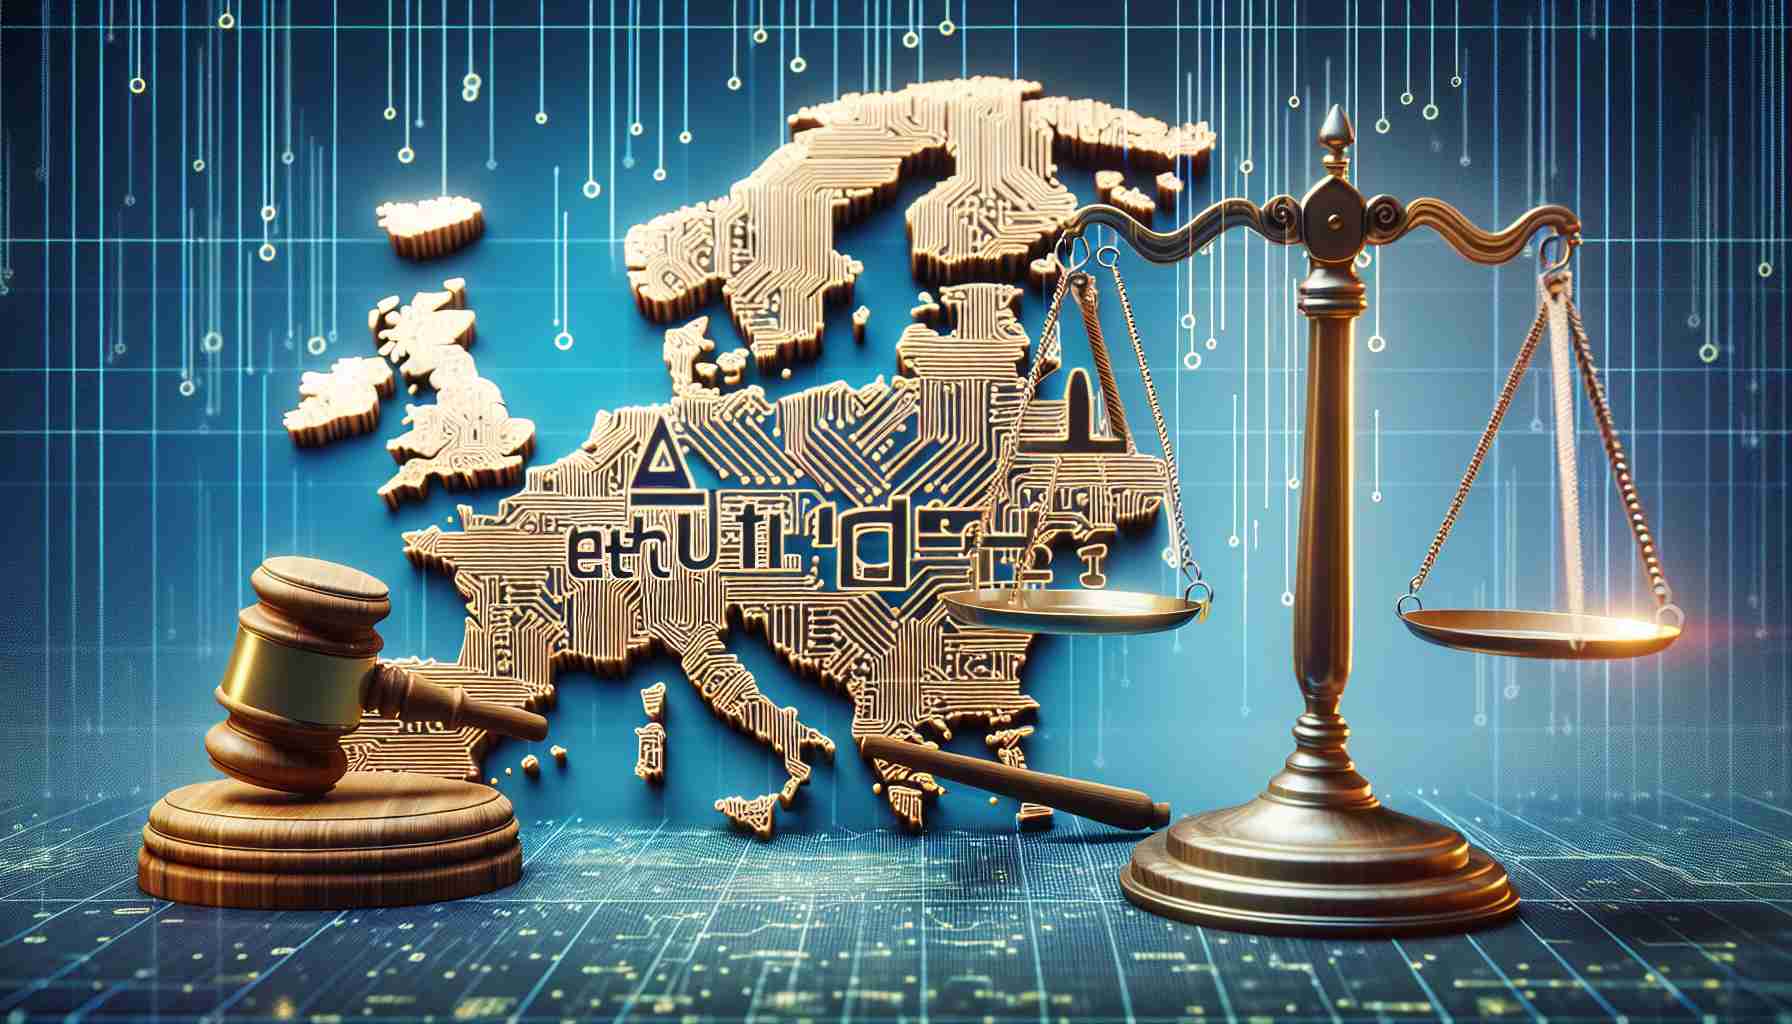 Europe Paves the Way for Ethical AI with Groundbreaking Regulation